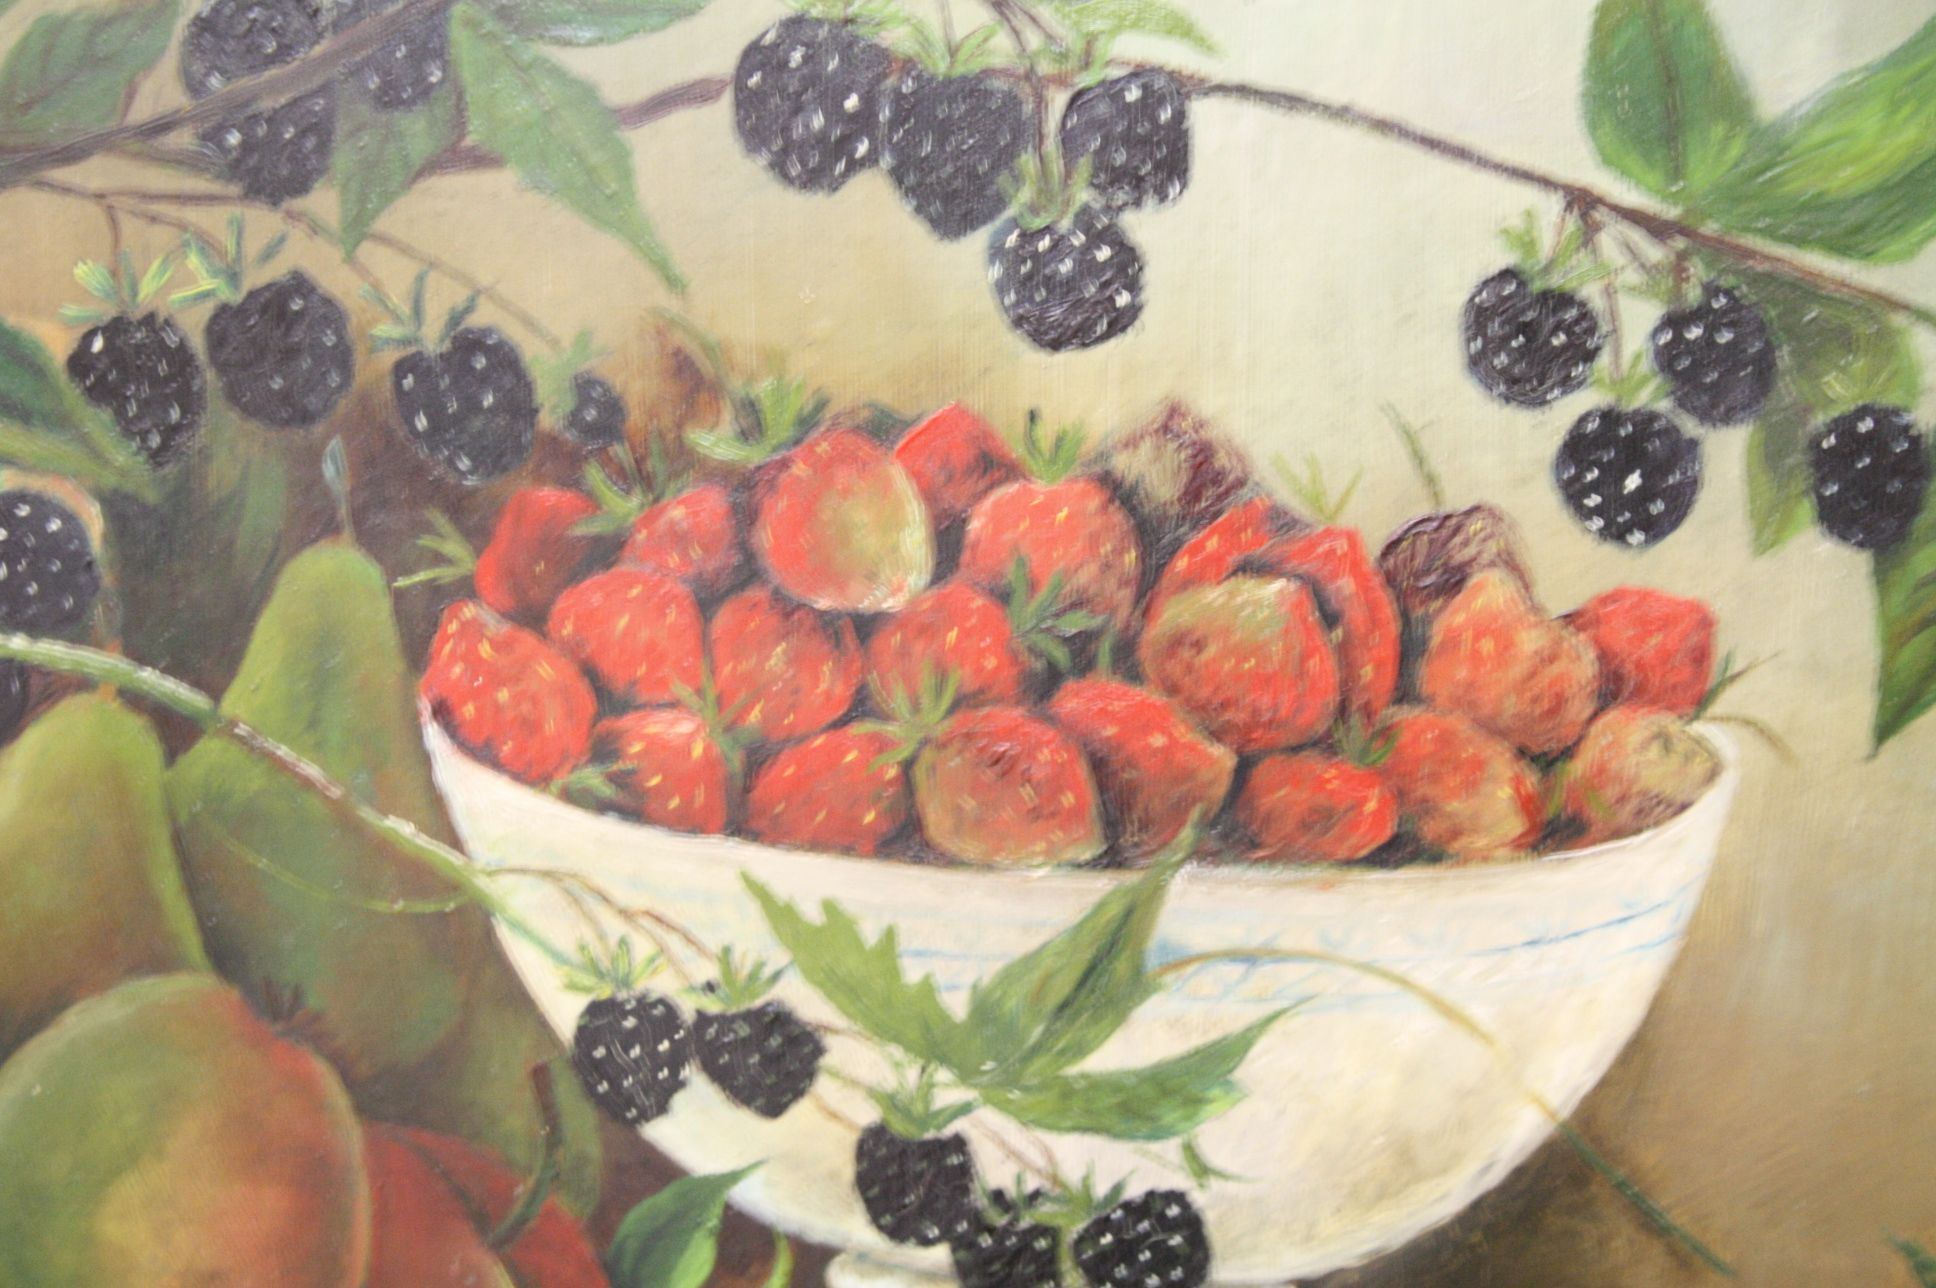 Oil Painting on Board of Fruits including Blackberries, Strawberries, Apples and Pears, 59cms x - Image 2 of 3